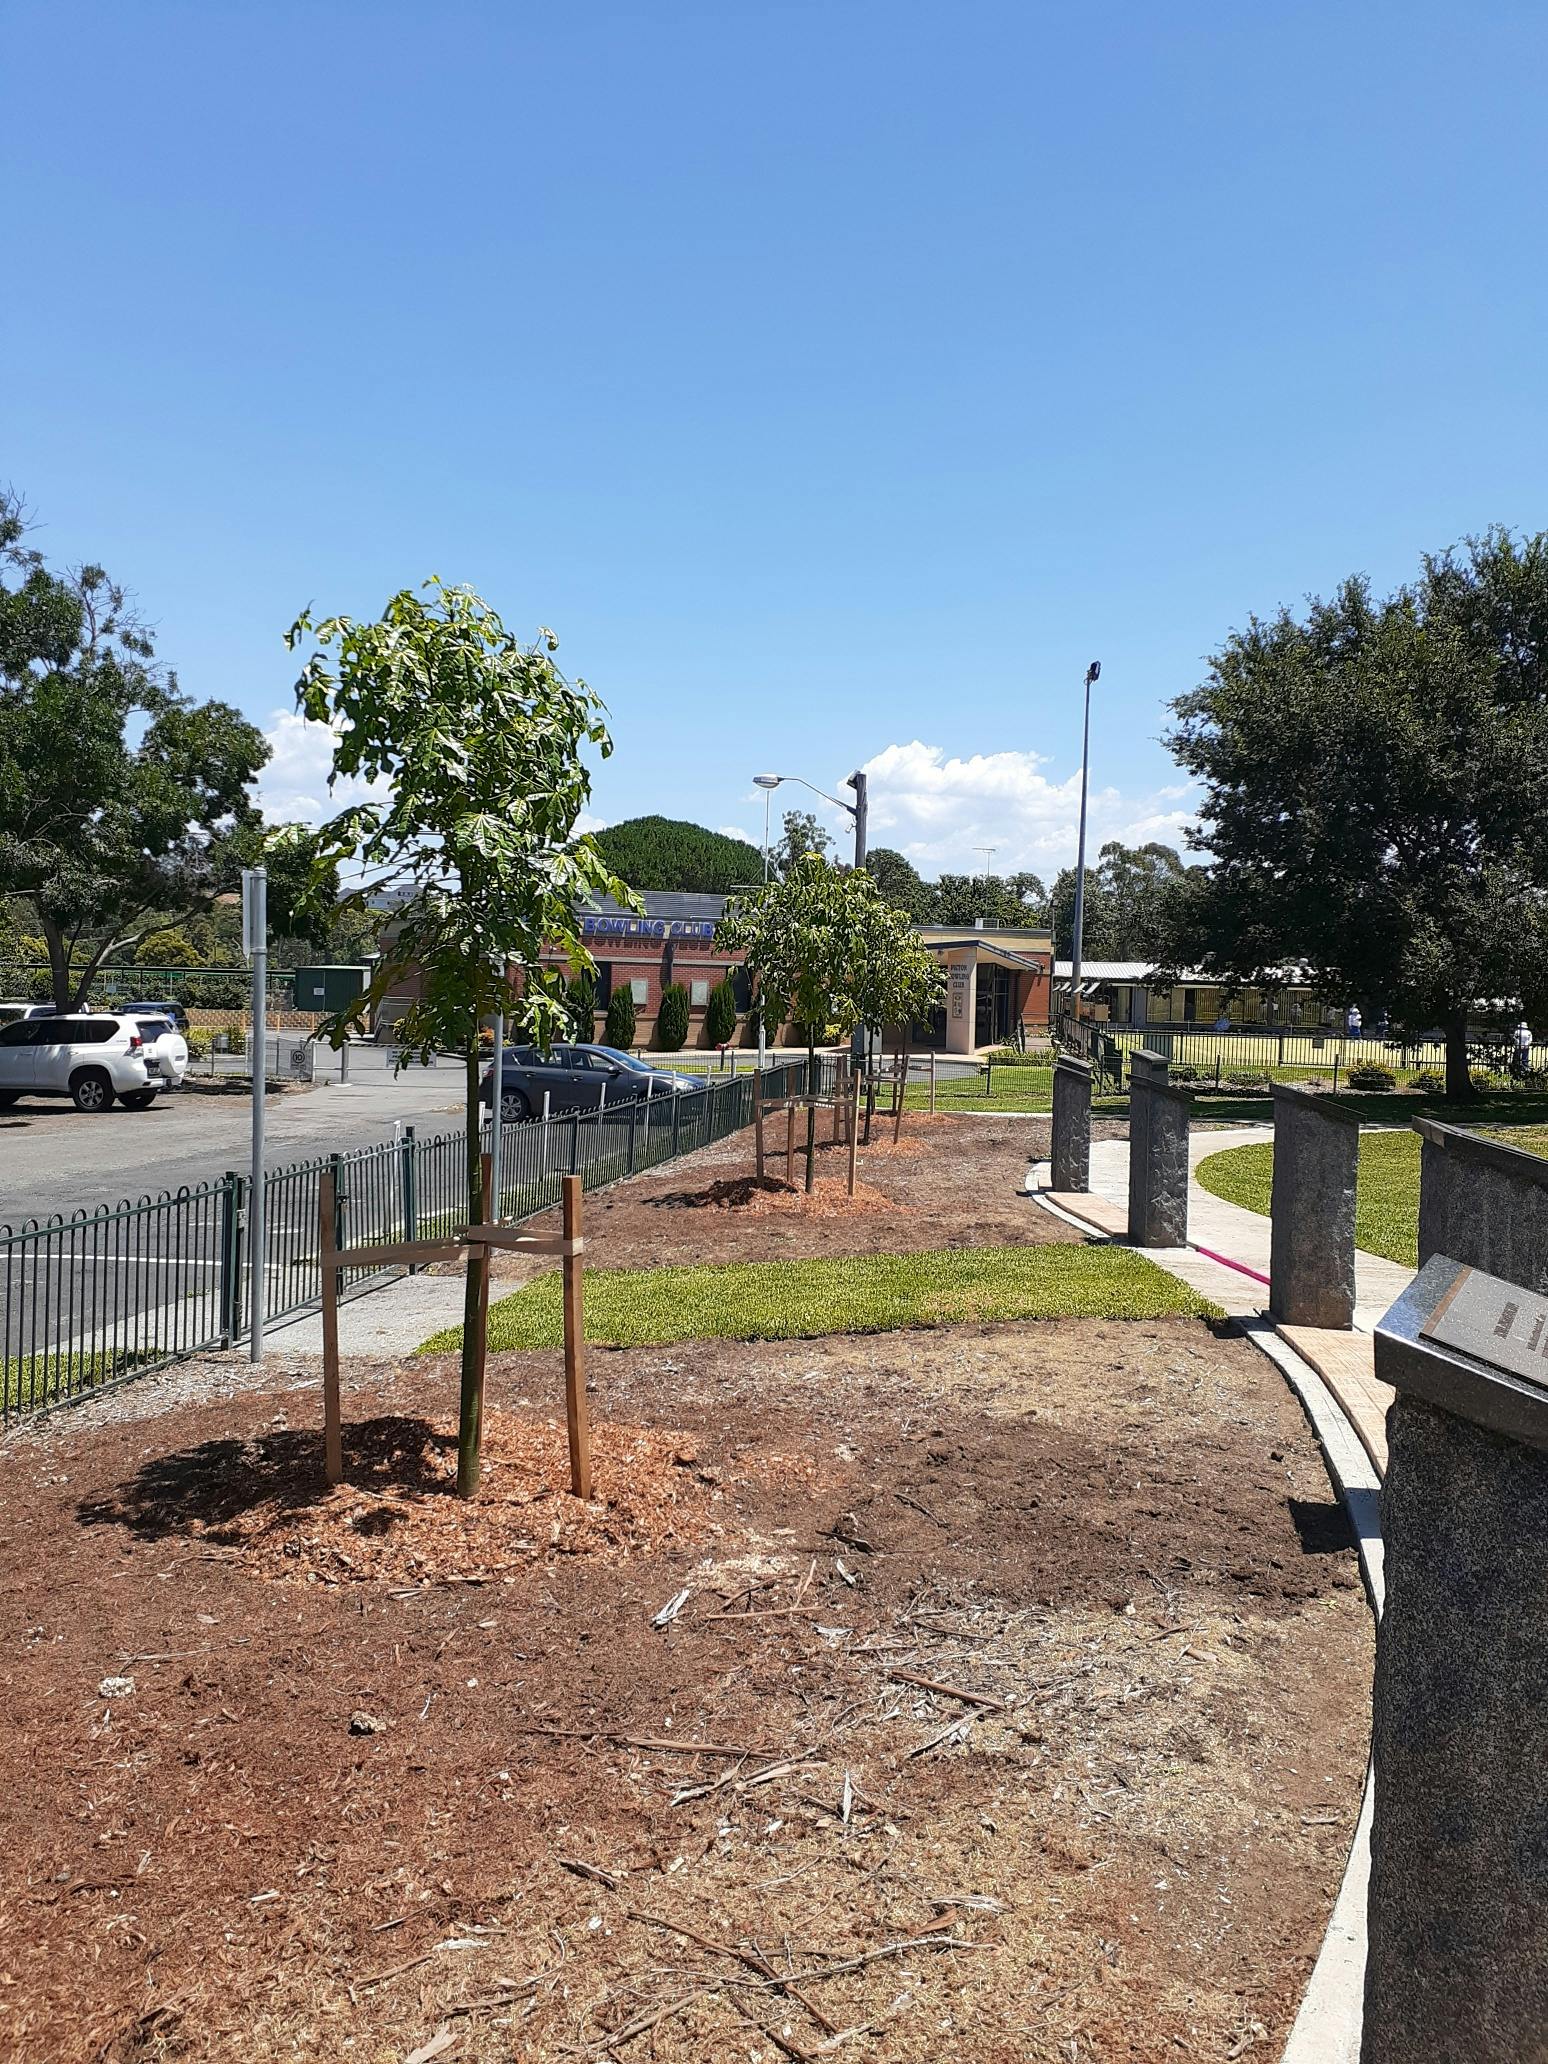 Trees planted and the gardens to be completed